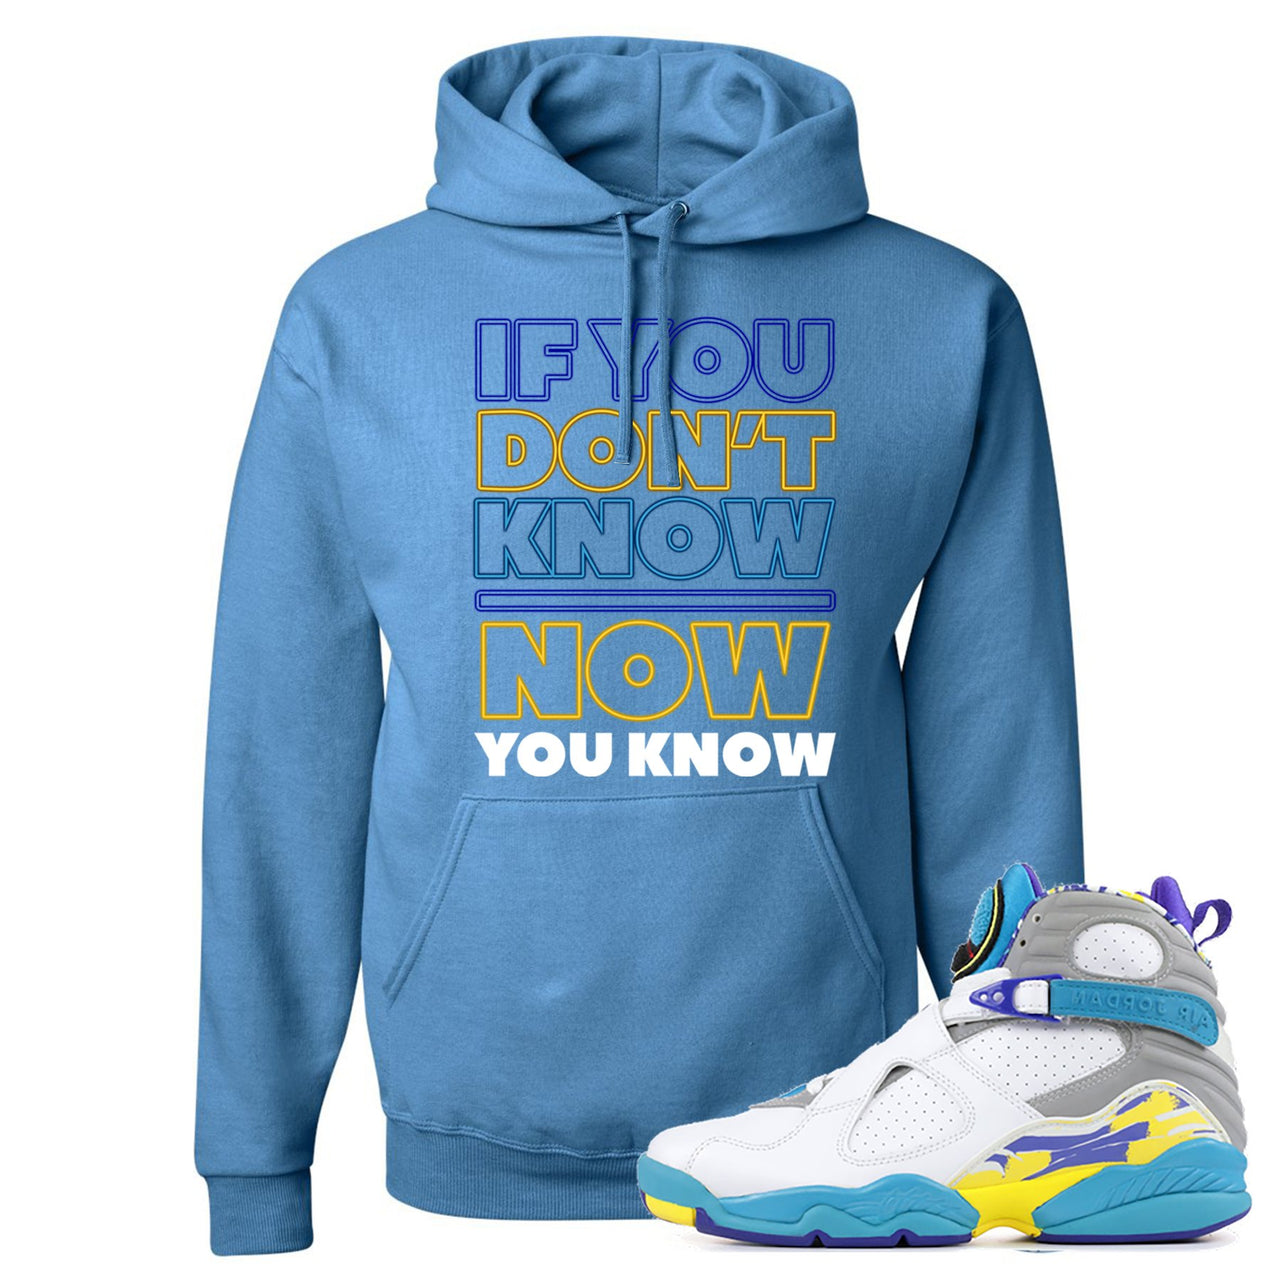 White Aqua 8s Hoodie | If You Don't Know Now You Know, Columbia Blue